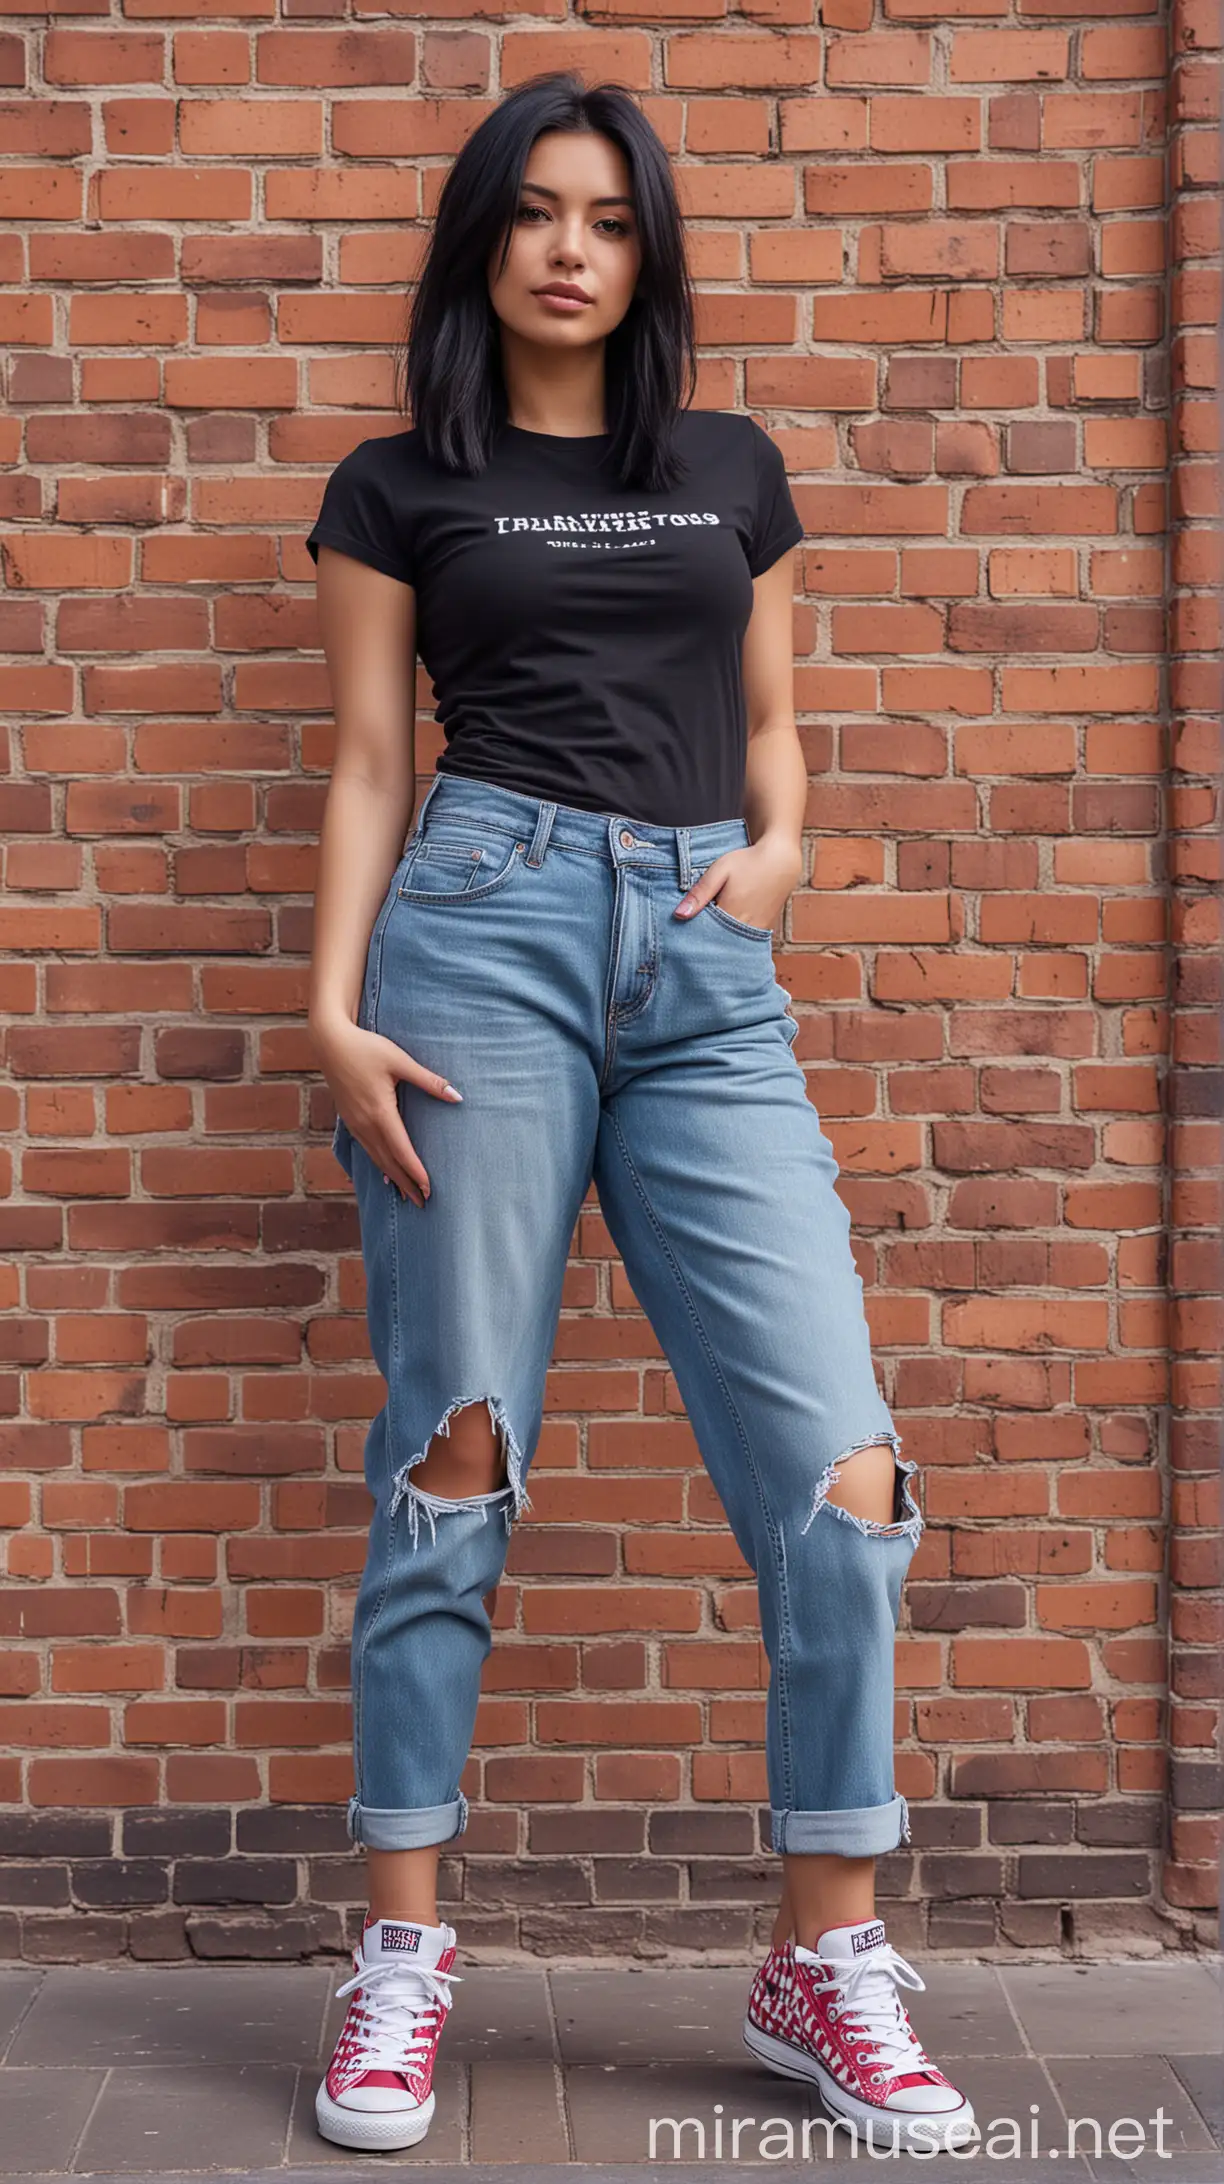 photography of a very beautiful woman, black hair in a long bob style, looking straight ahead, wearing a black t-shirt, with a tight checkered shirt, wearing tight ripped jeans, with purple converse shoes, standing in front of a red brick wall, photography, shot by S24 camera Ultra, UHD quality